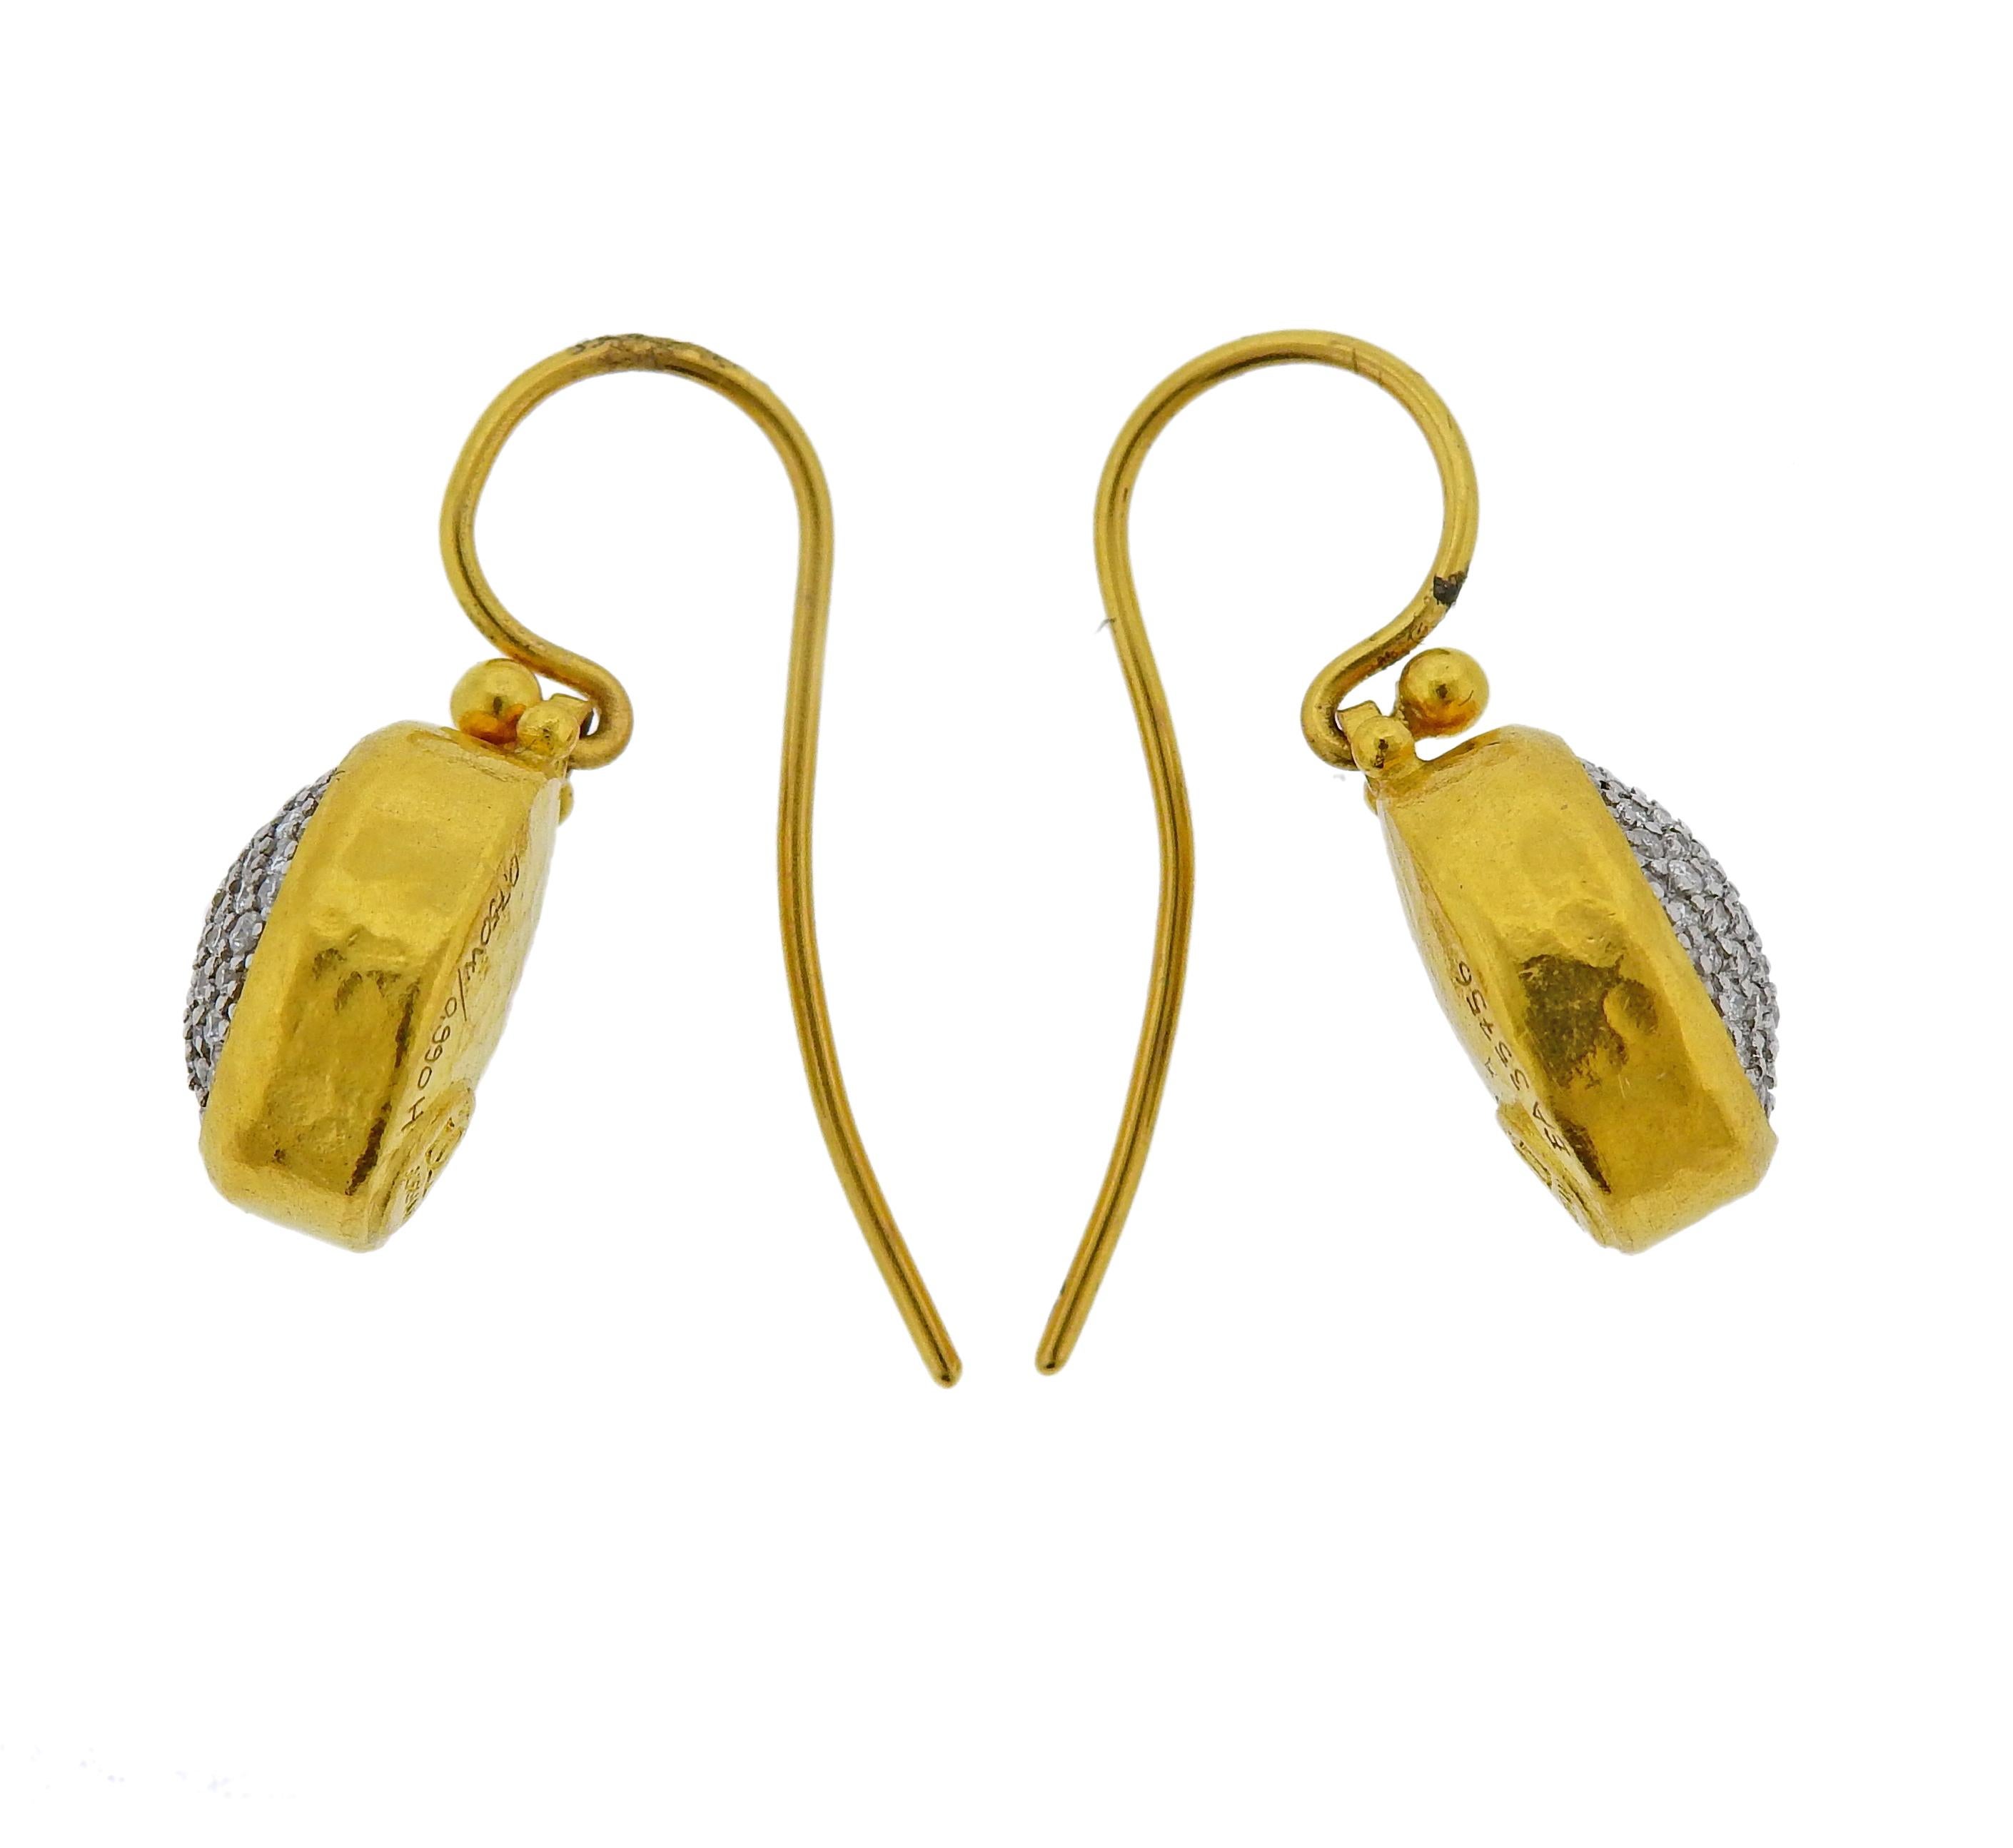 Brand new item made in 18k white gold and 22K yellow gold Amulet Pave diamond drop earrings by Gurhan, set with approx. 0.43ctw of GH/VS white diamonds. Retail $4,620.